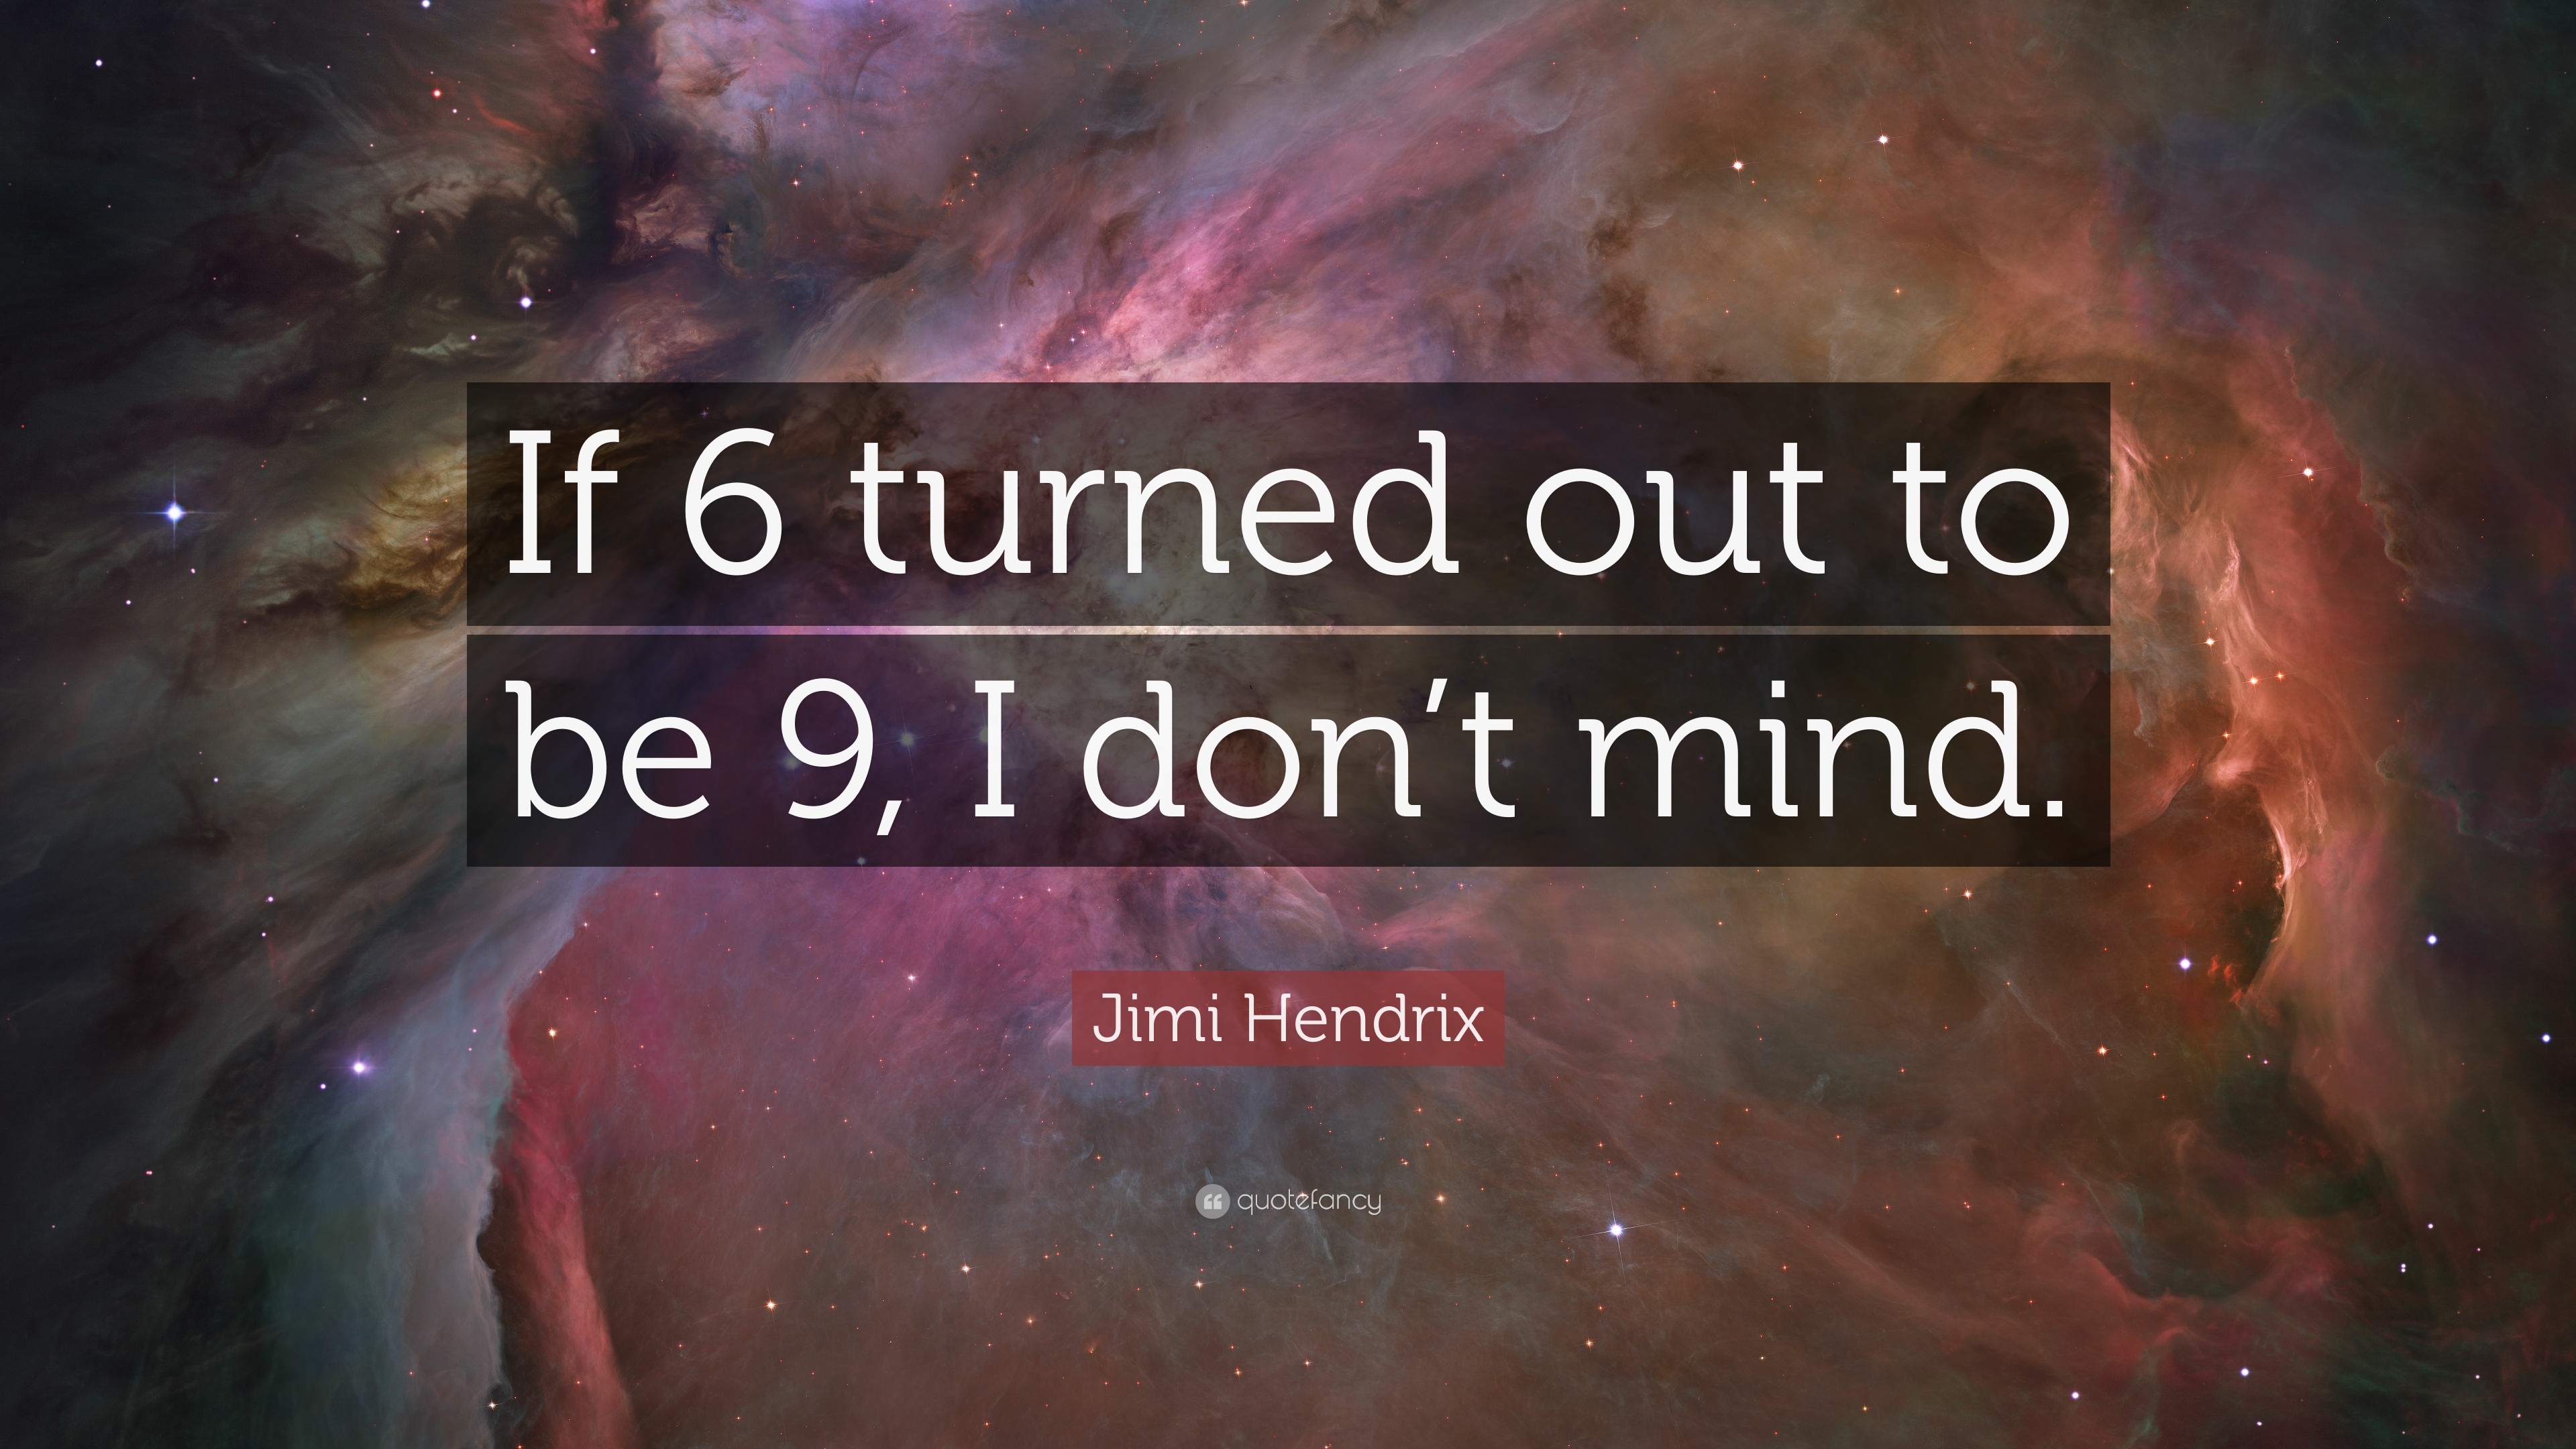 6 Quotes About Jimi Hendrix